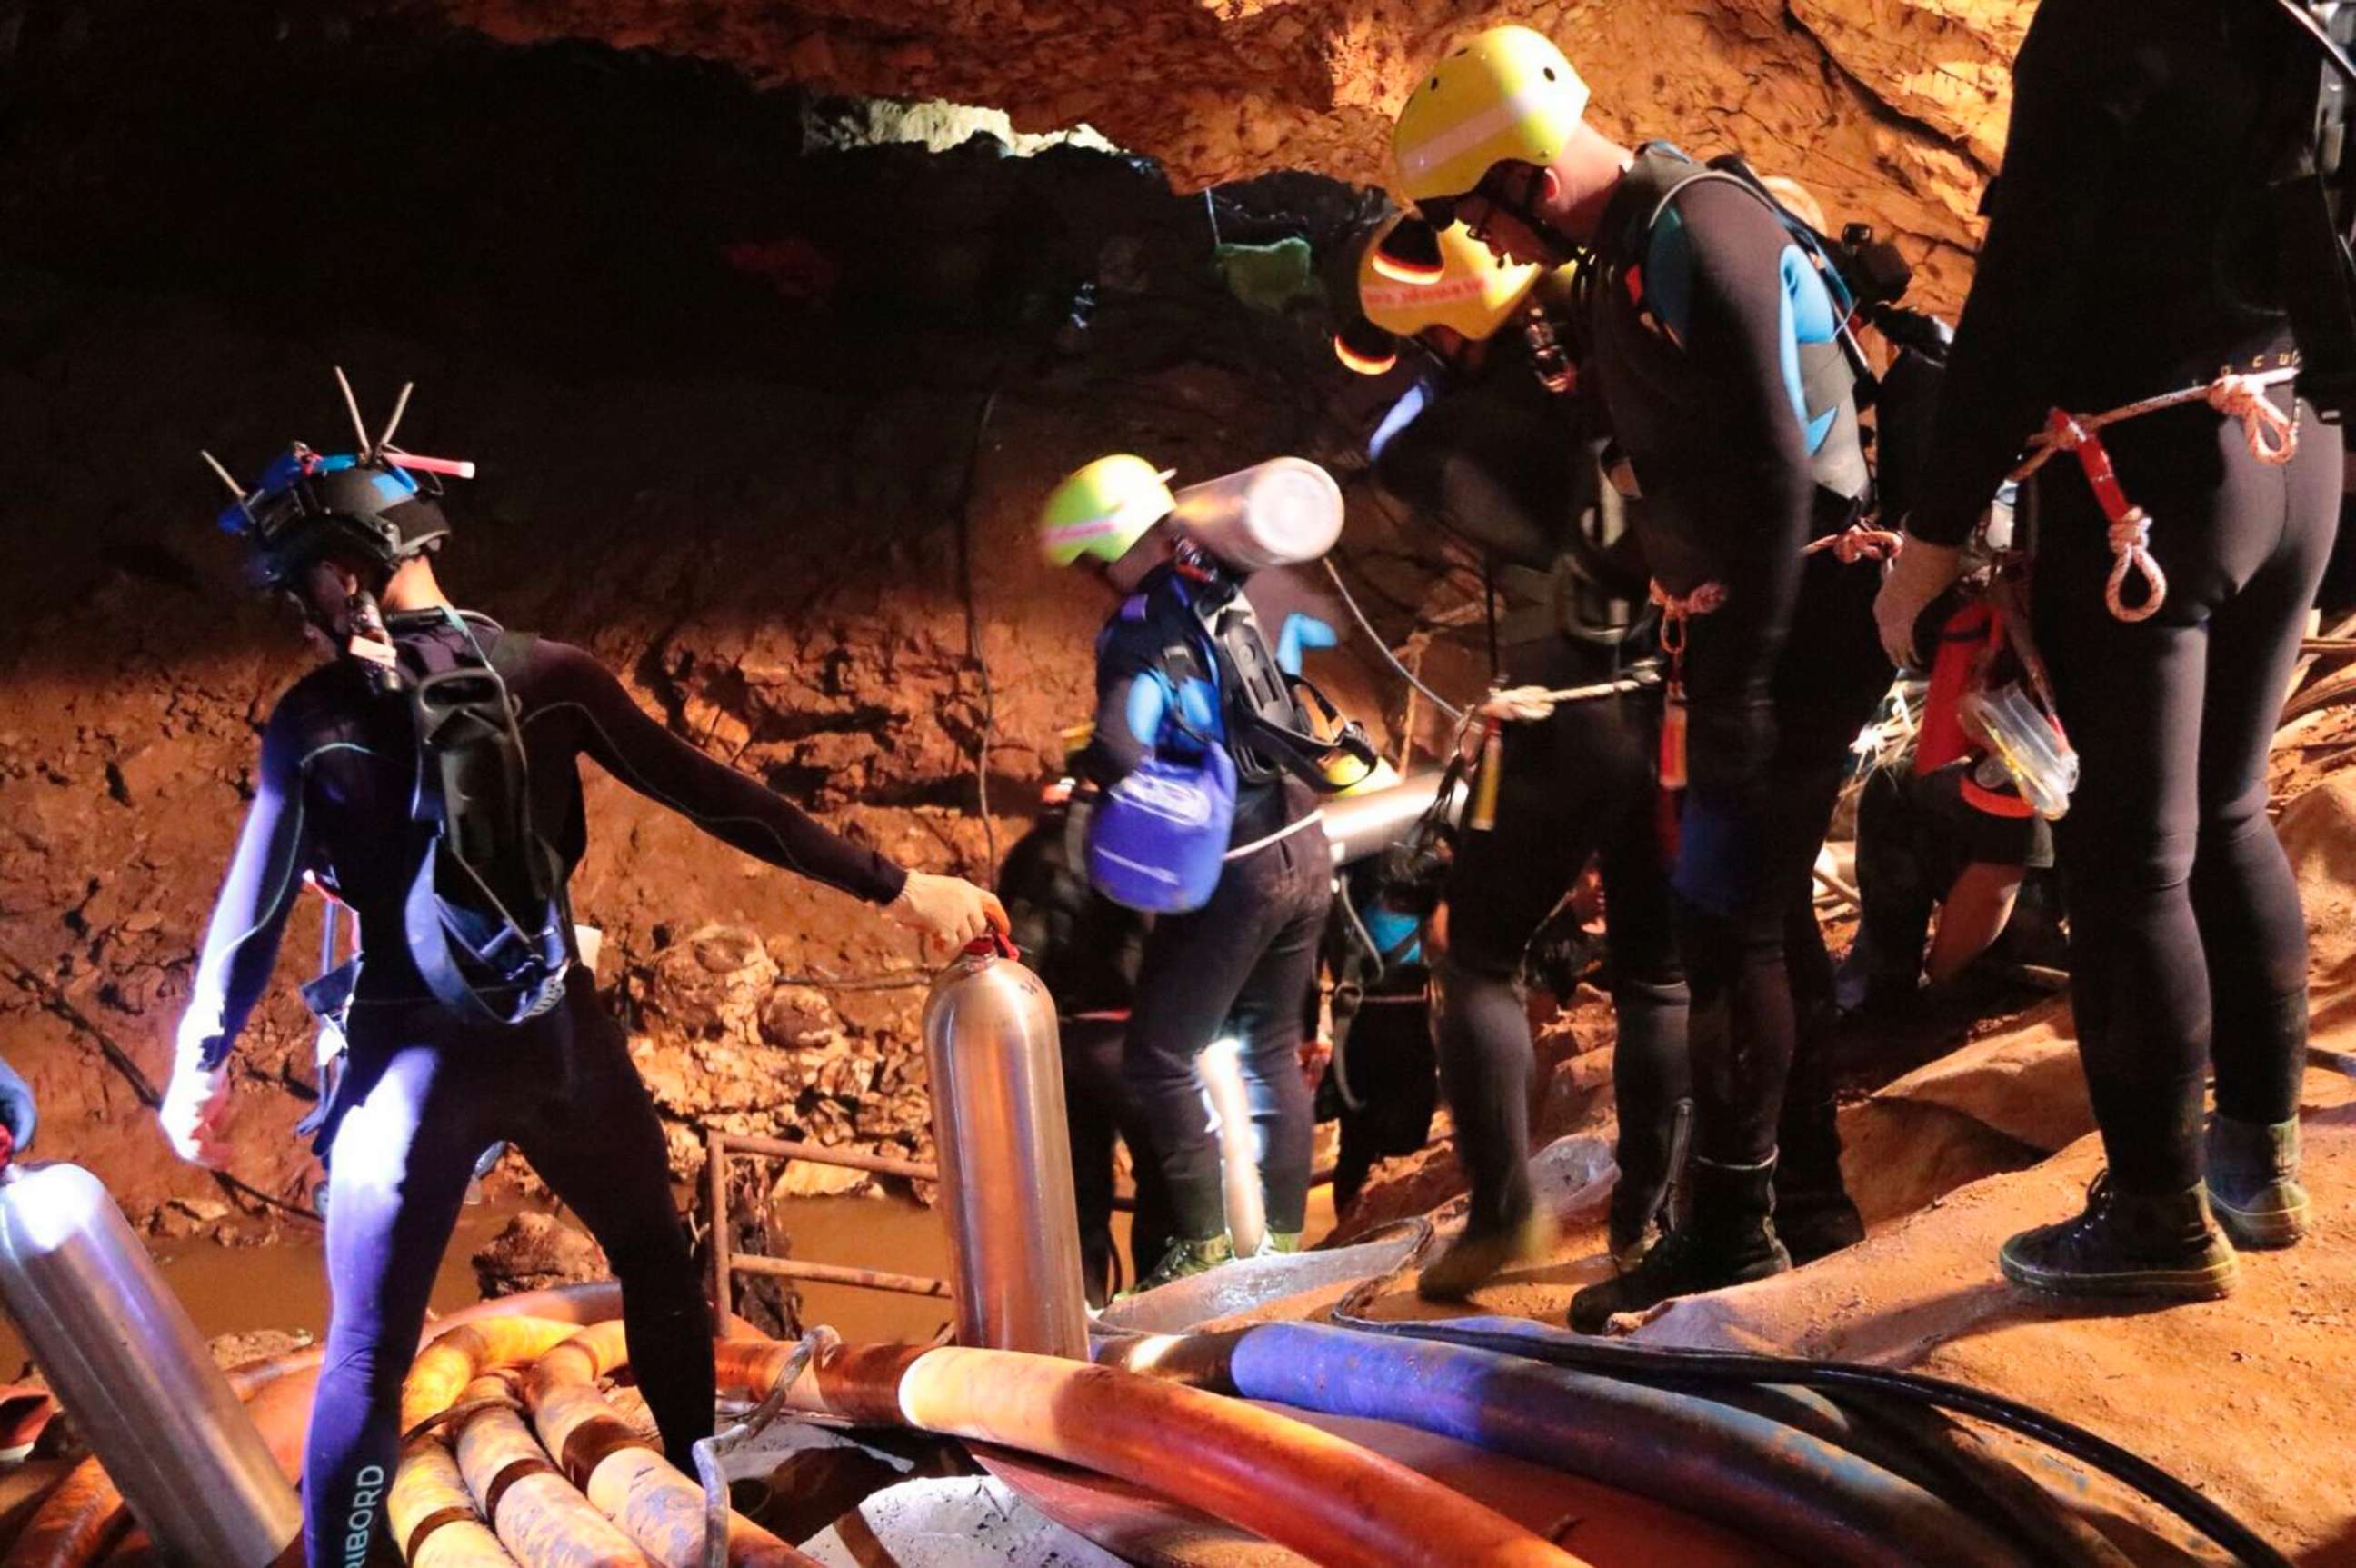 PHOTO: Thai rescue team members walk inside a cave where 12 boys and their soccer coach have been trapped since June 23, in Mae Sai, Chiang Rai province, northern Thailand in this undated photo released by Royal Thai Navy, July 7, 2018.